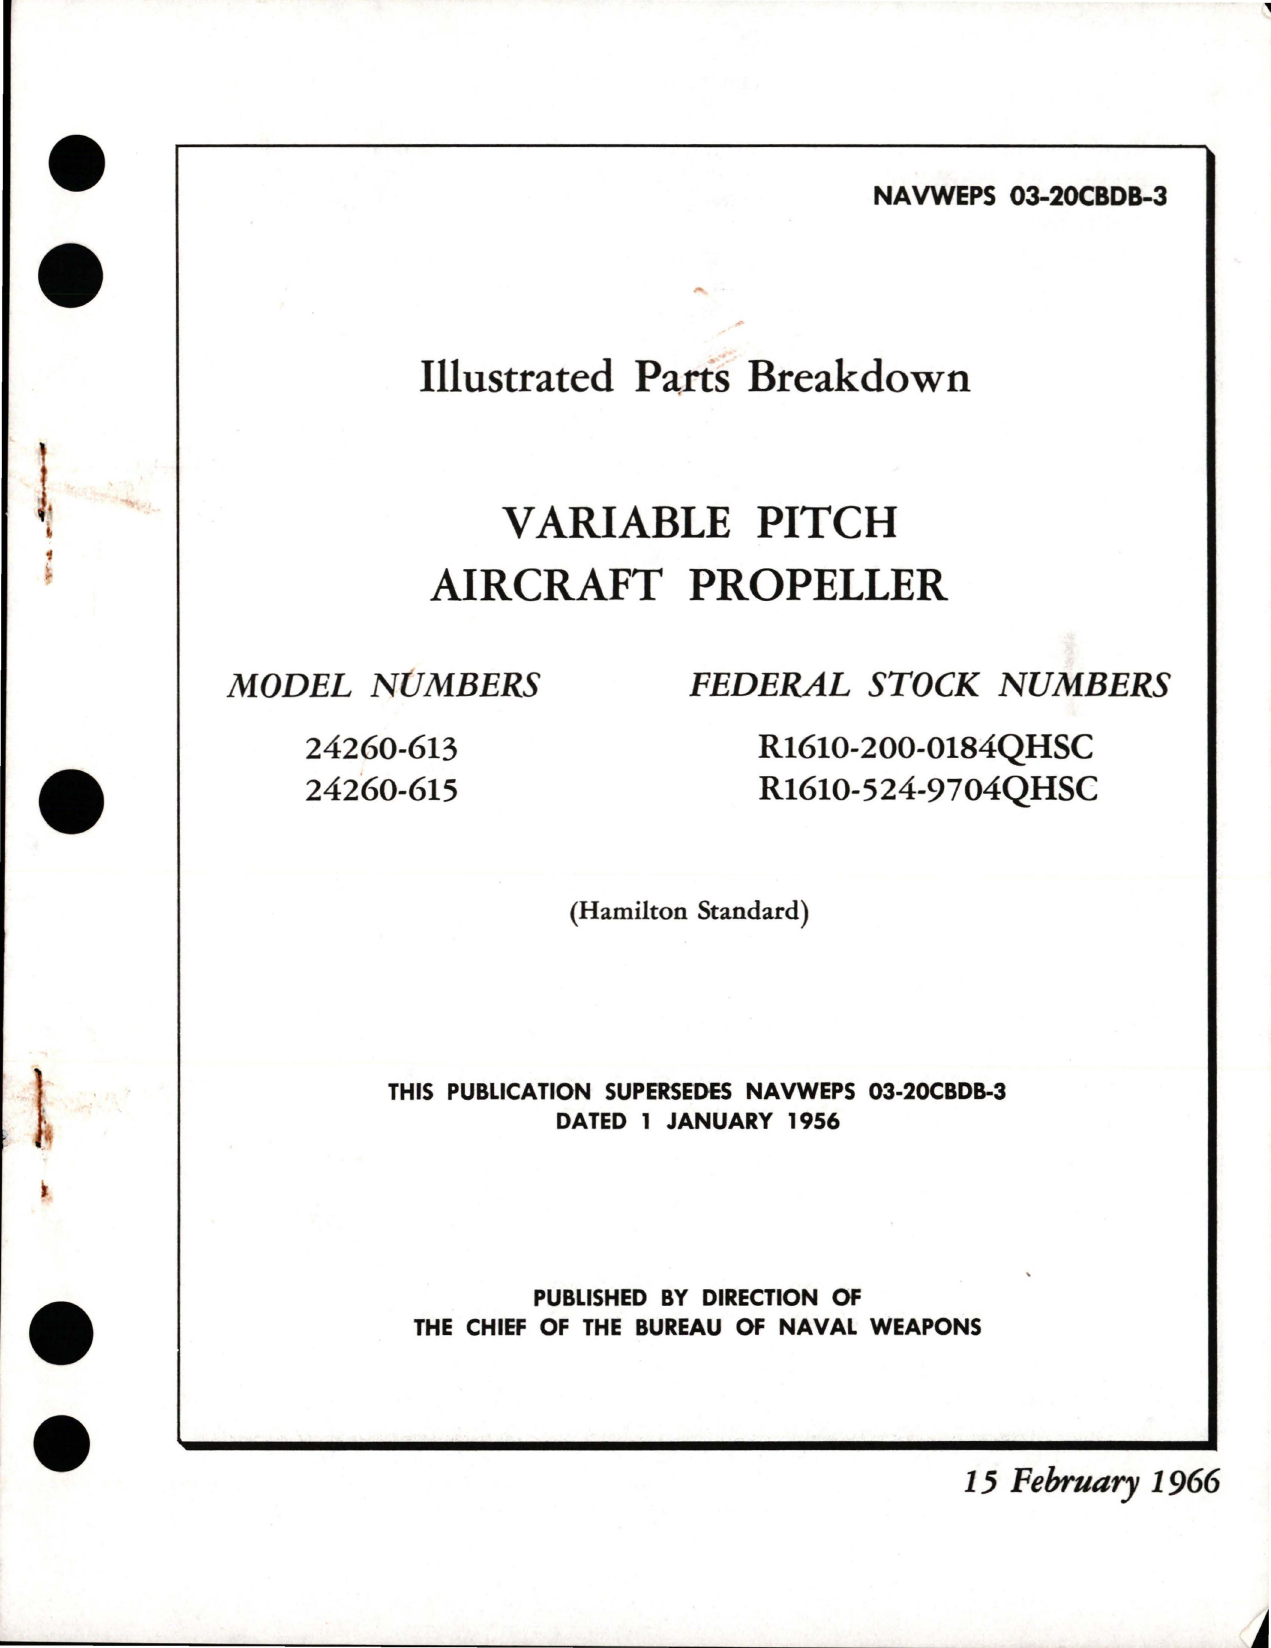 Sample page 1 from AirCorps Library document: Illustrated Parts Breakdown for Variable Pitch Propeller - Models 24260-613 and 24260-615